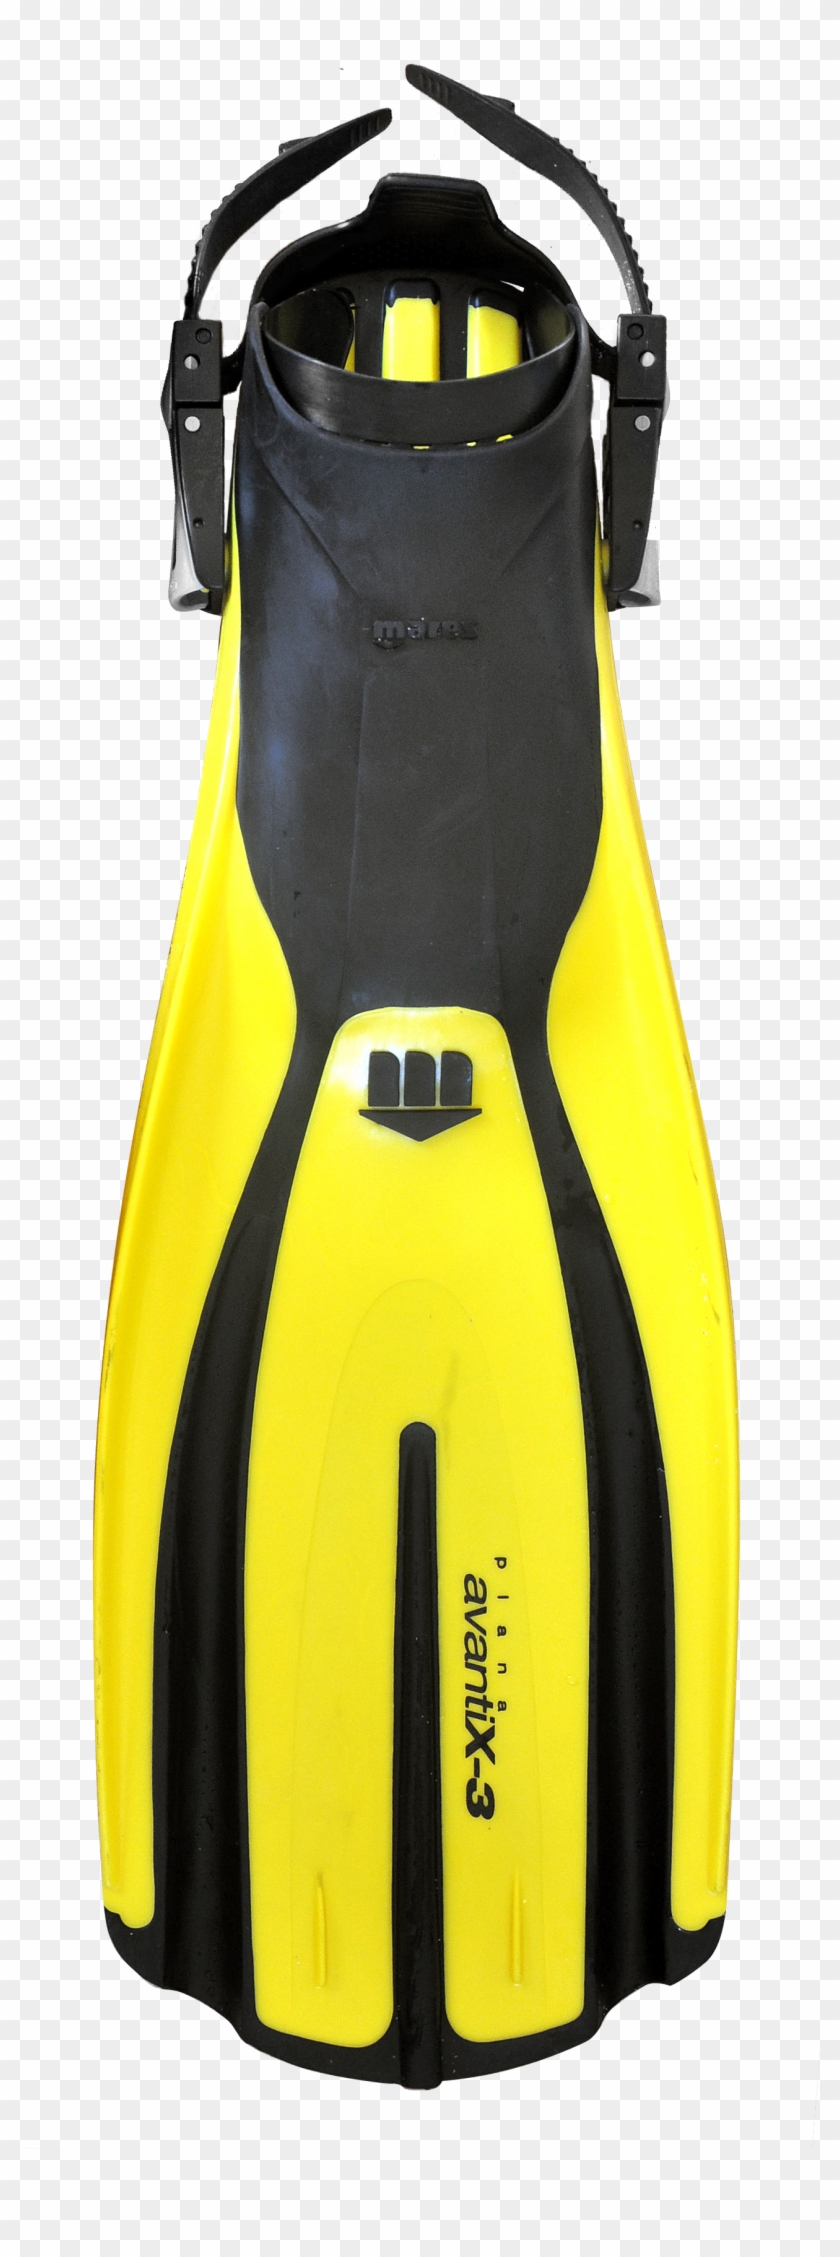 Flippers Png - Mares Plana Avanti X3 Fins (yellow) #924449